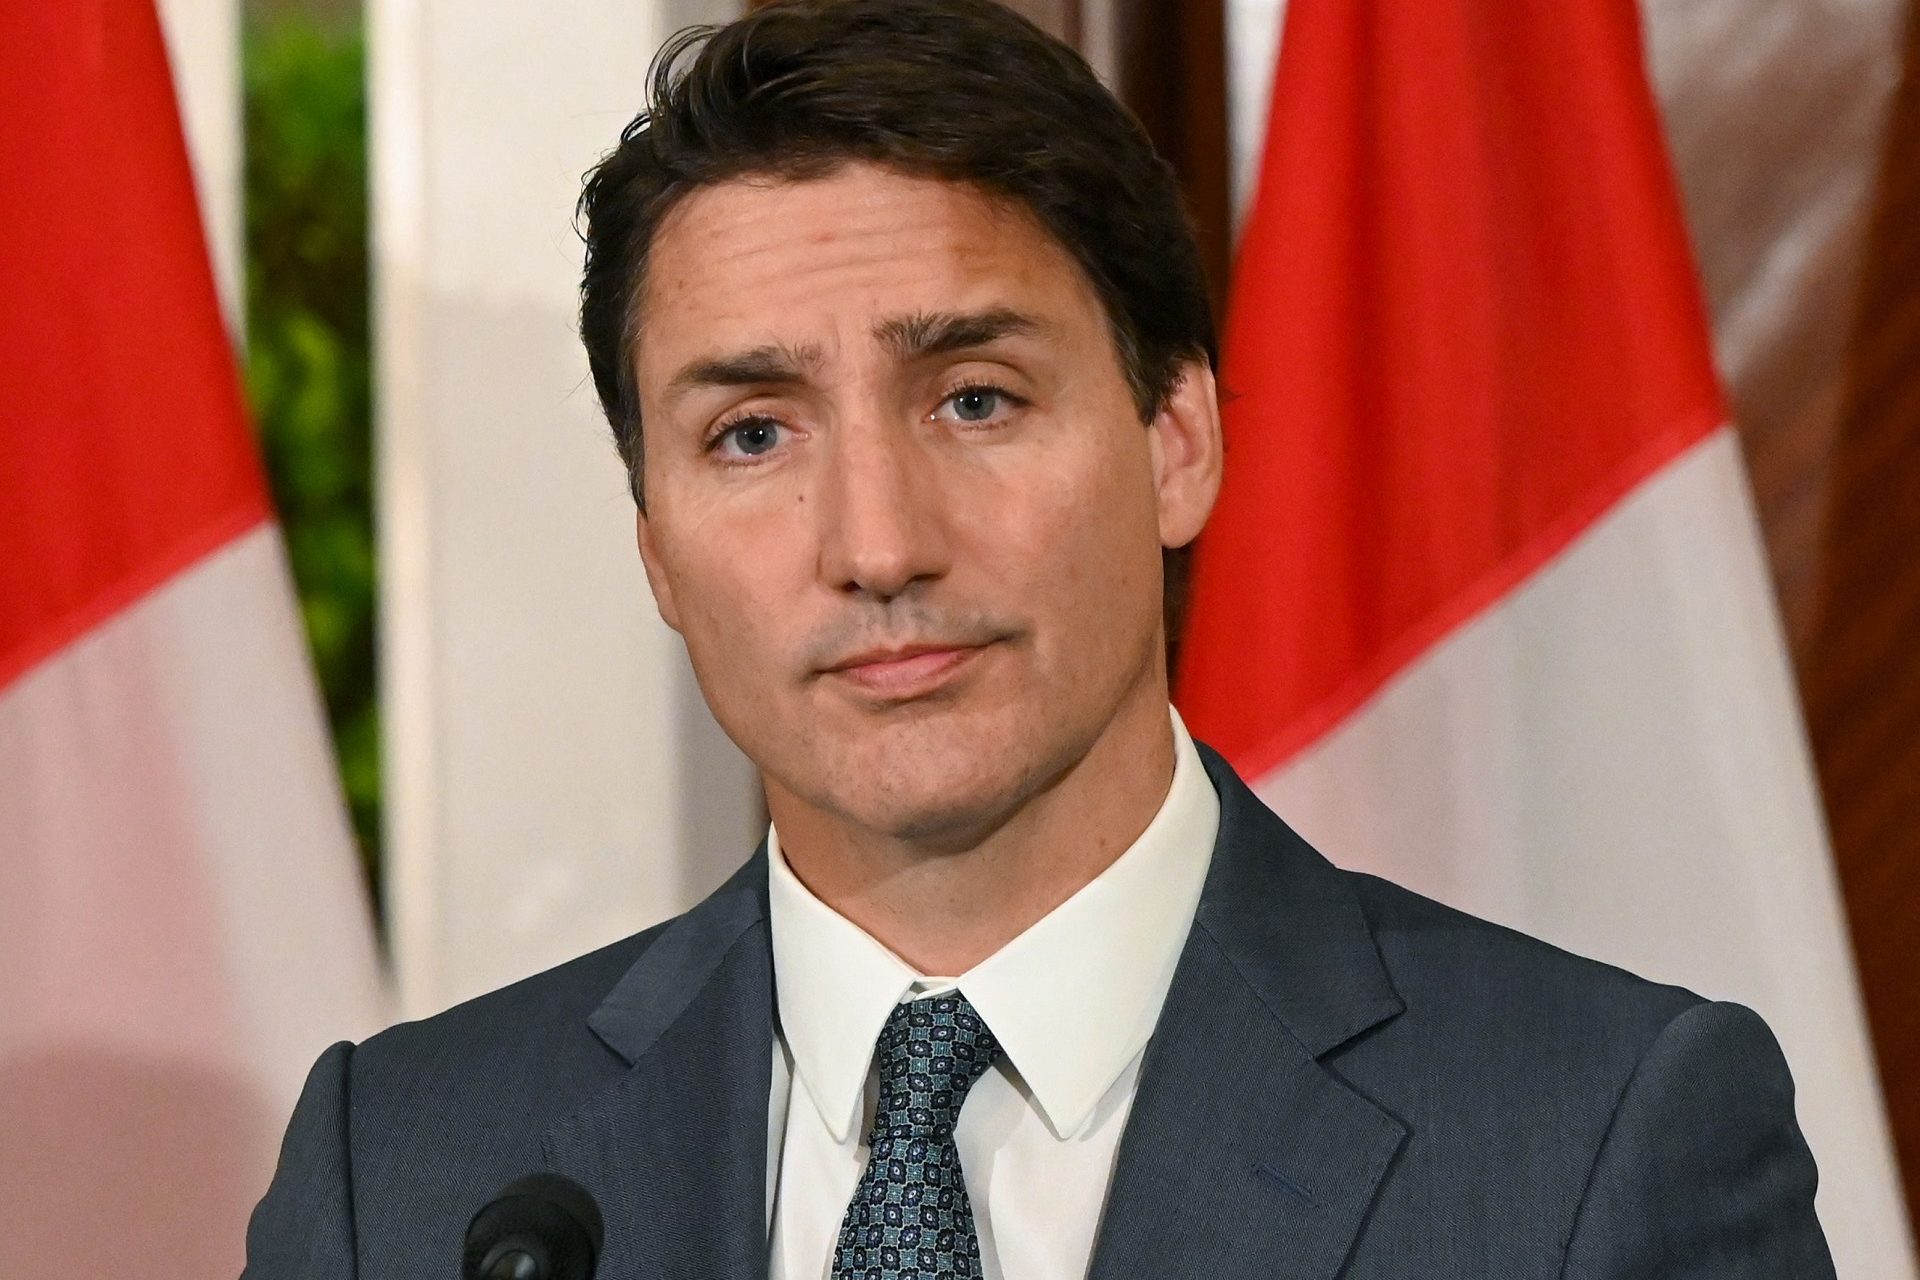 Will Trudeau quit his job as Canada’s prime minister?